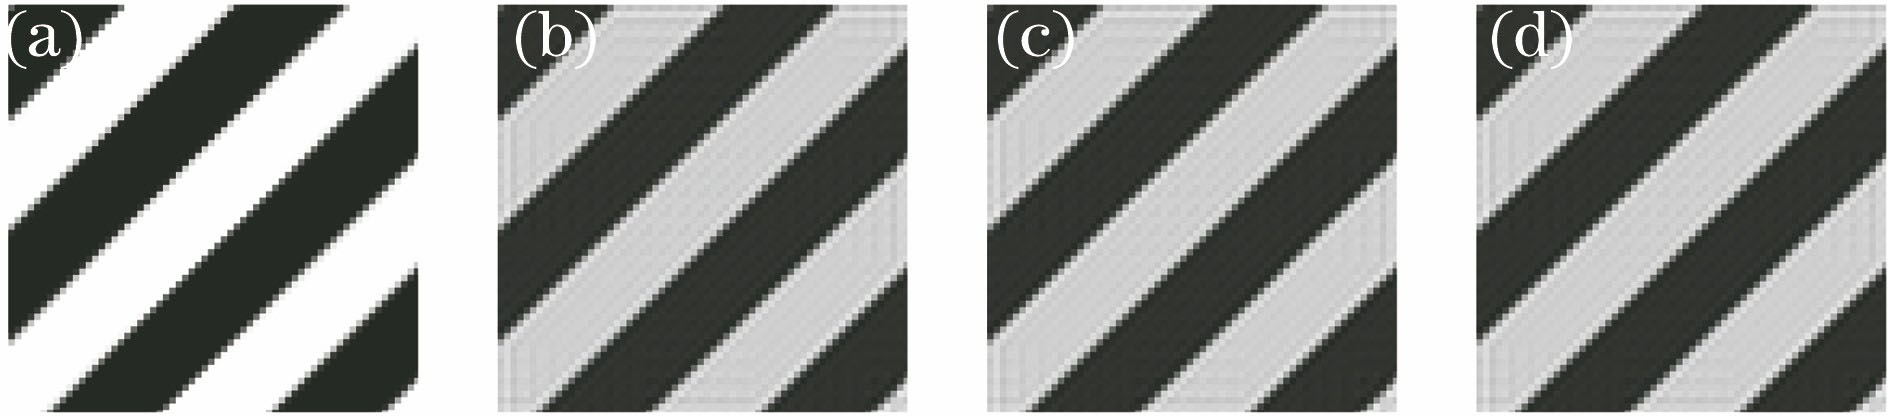 Reconstruction results. (a) Original image; (b) reconstruction result of SGI; (c) reconstruction result using only sinusoidal speckle; (d) reconstruction result using only cosine speckle